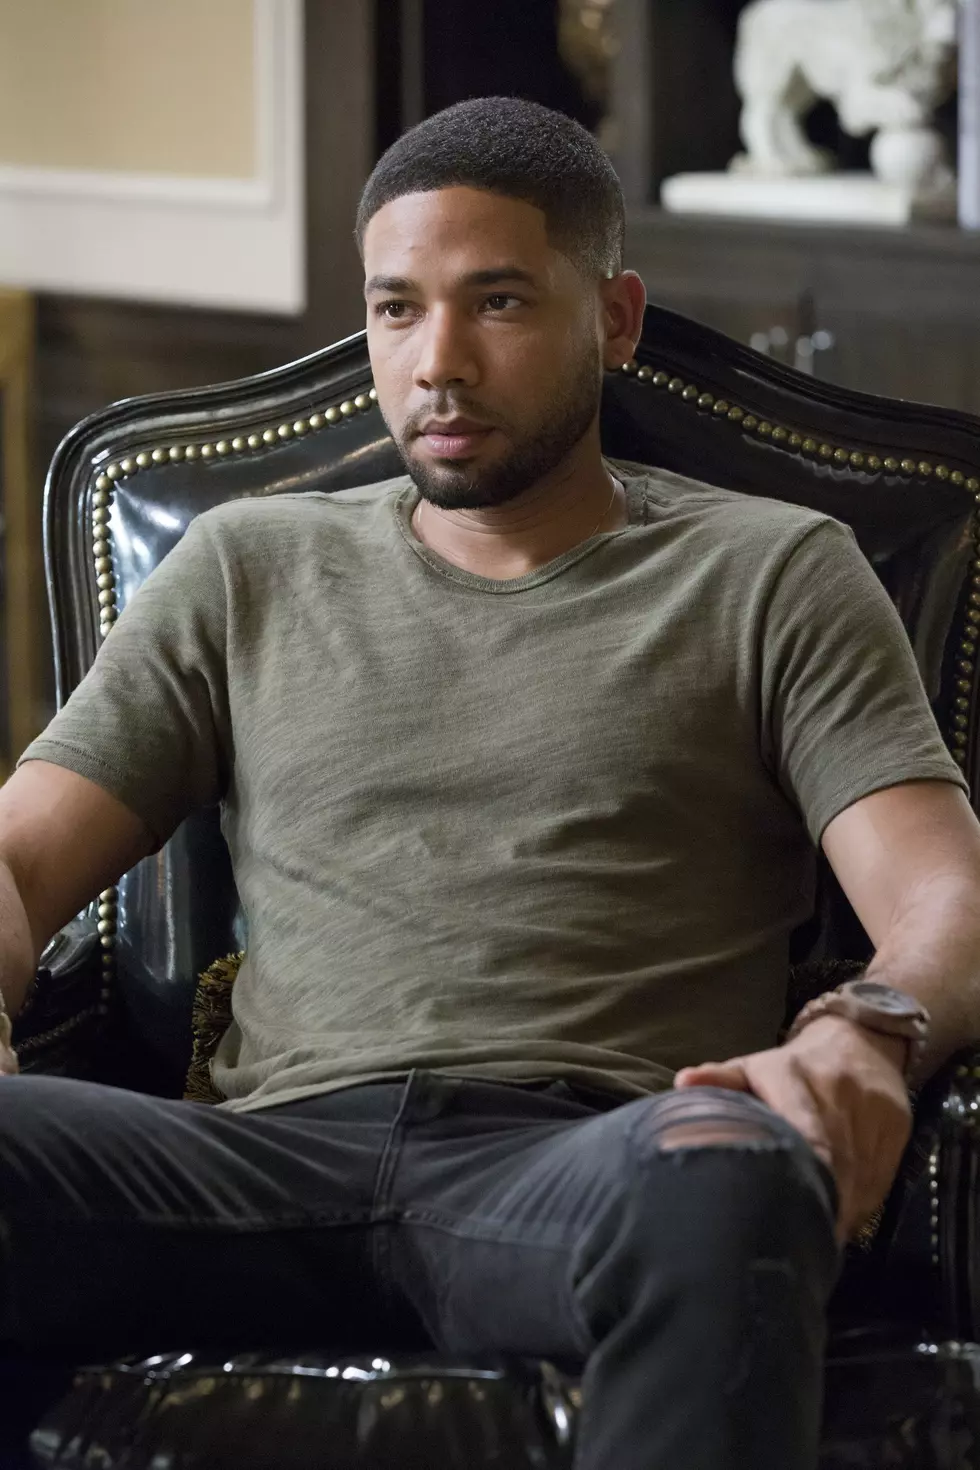 Disgraced &#8220;Empire&#8221; Star Jussie Smollet&#8217;s Family Ties To Louisiana